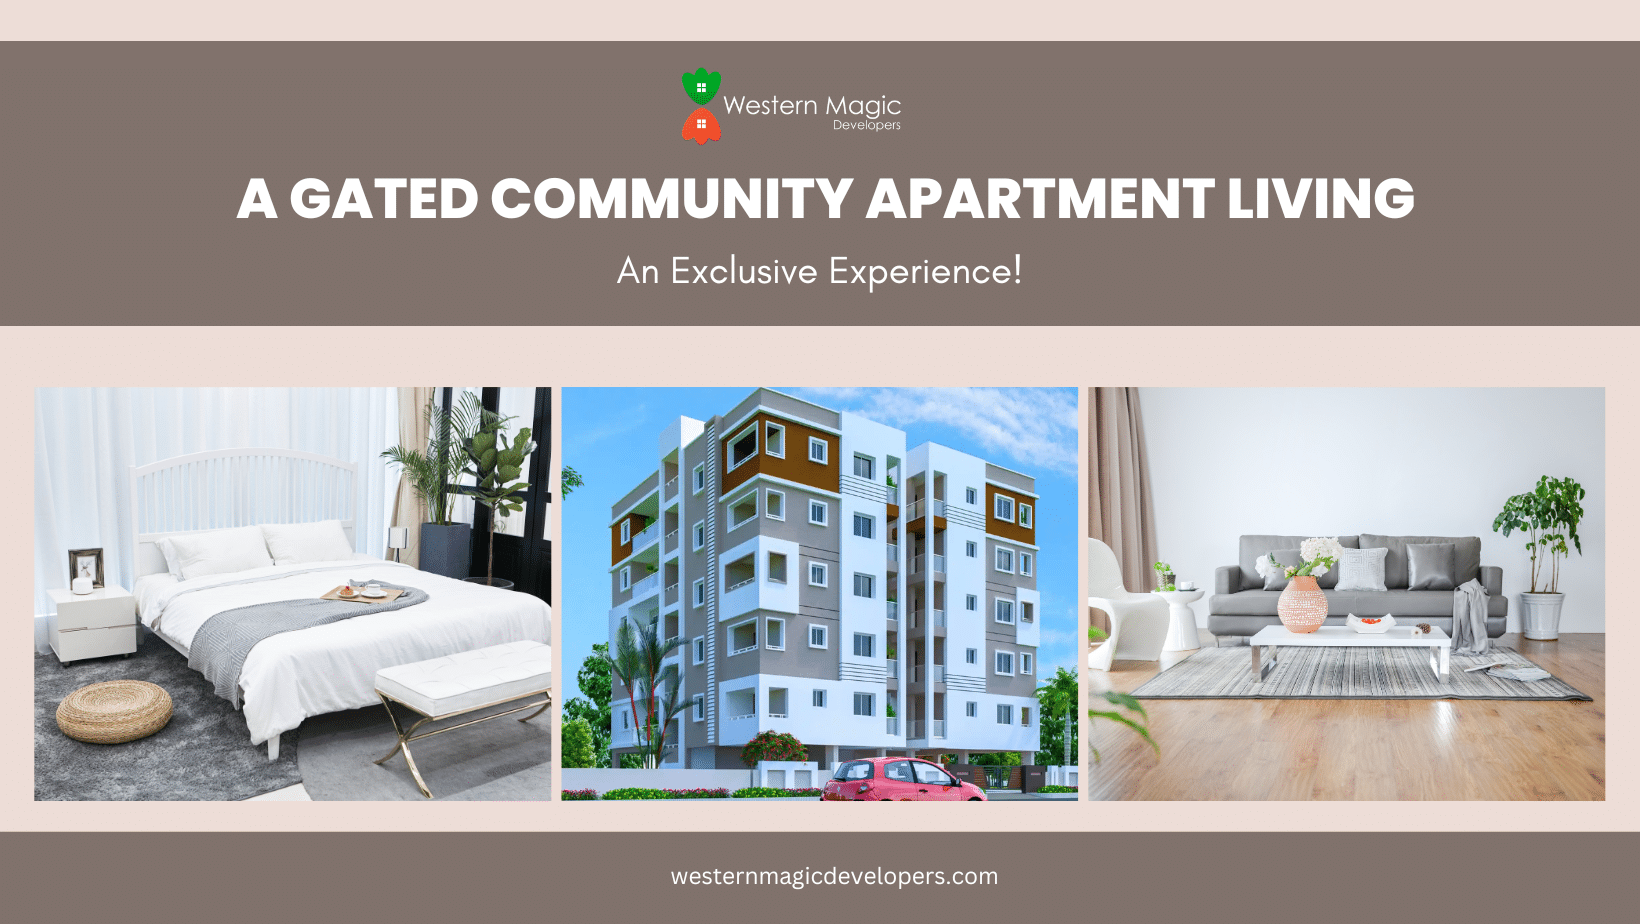 A Gated Community Apartment Living: An Exclusive Experience!